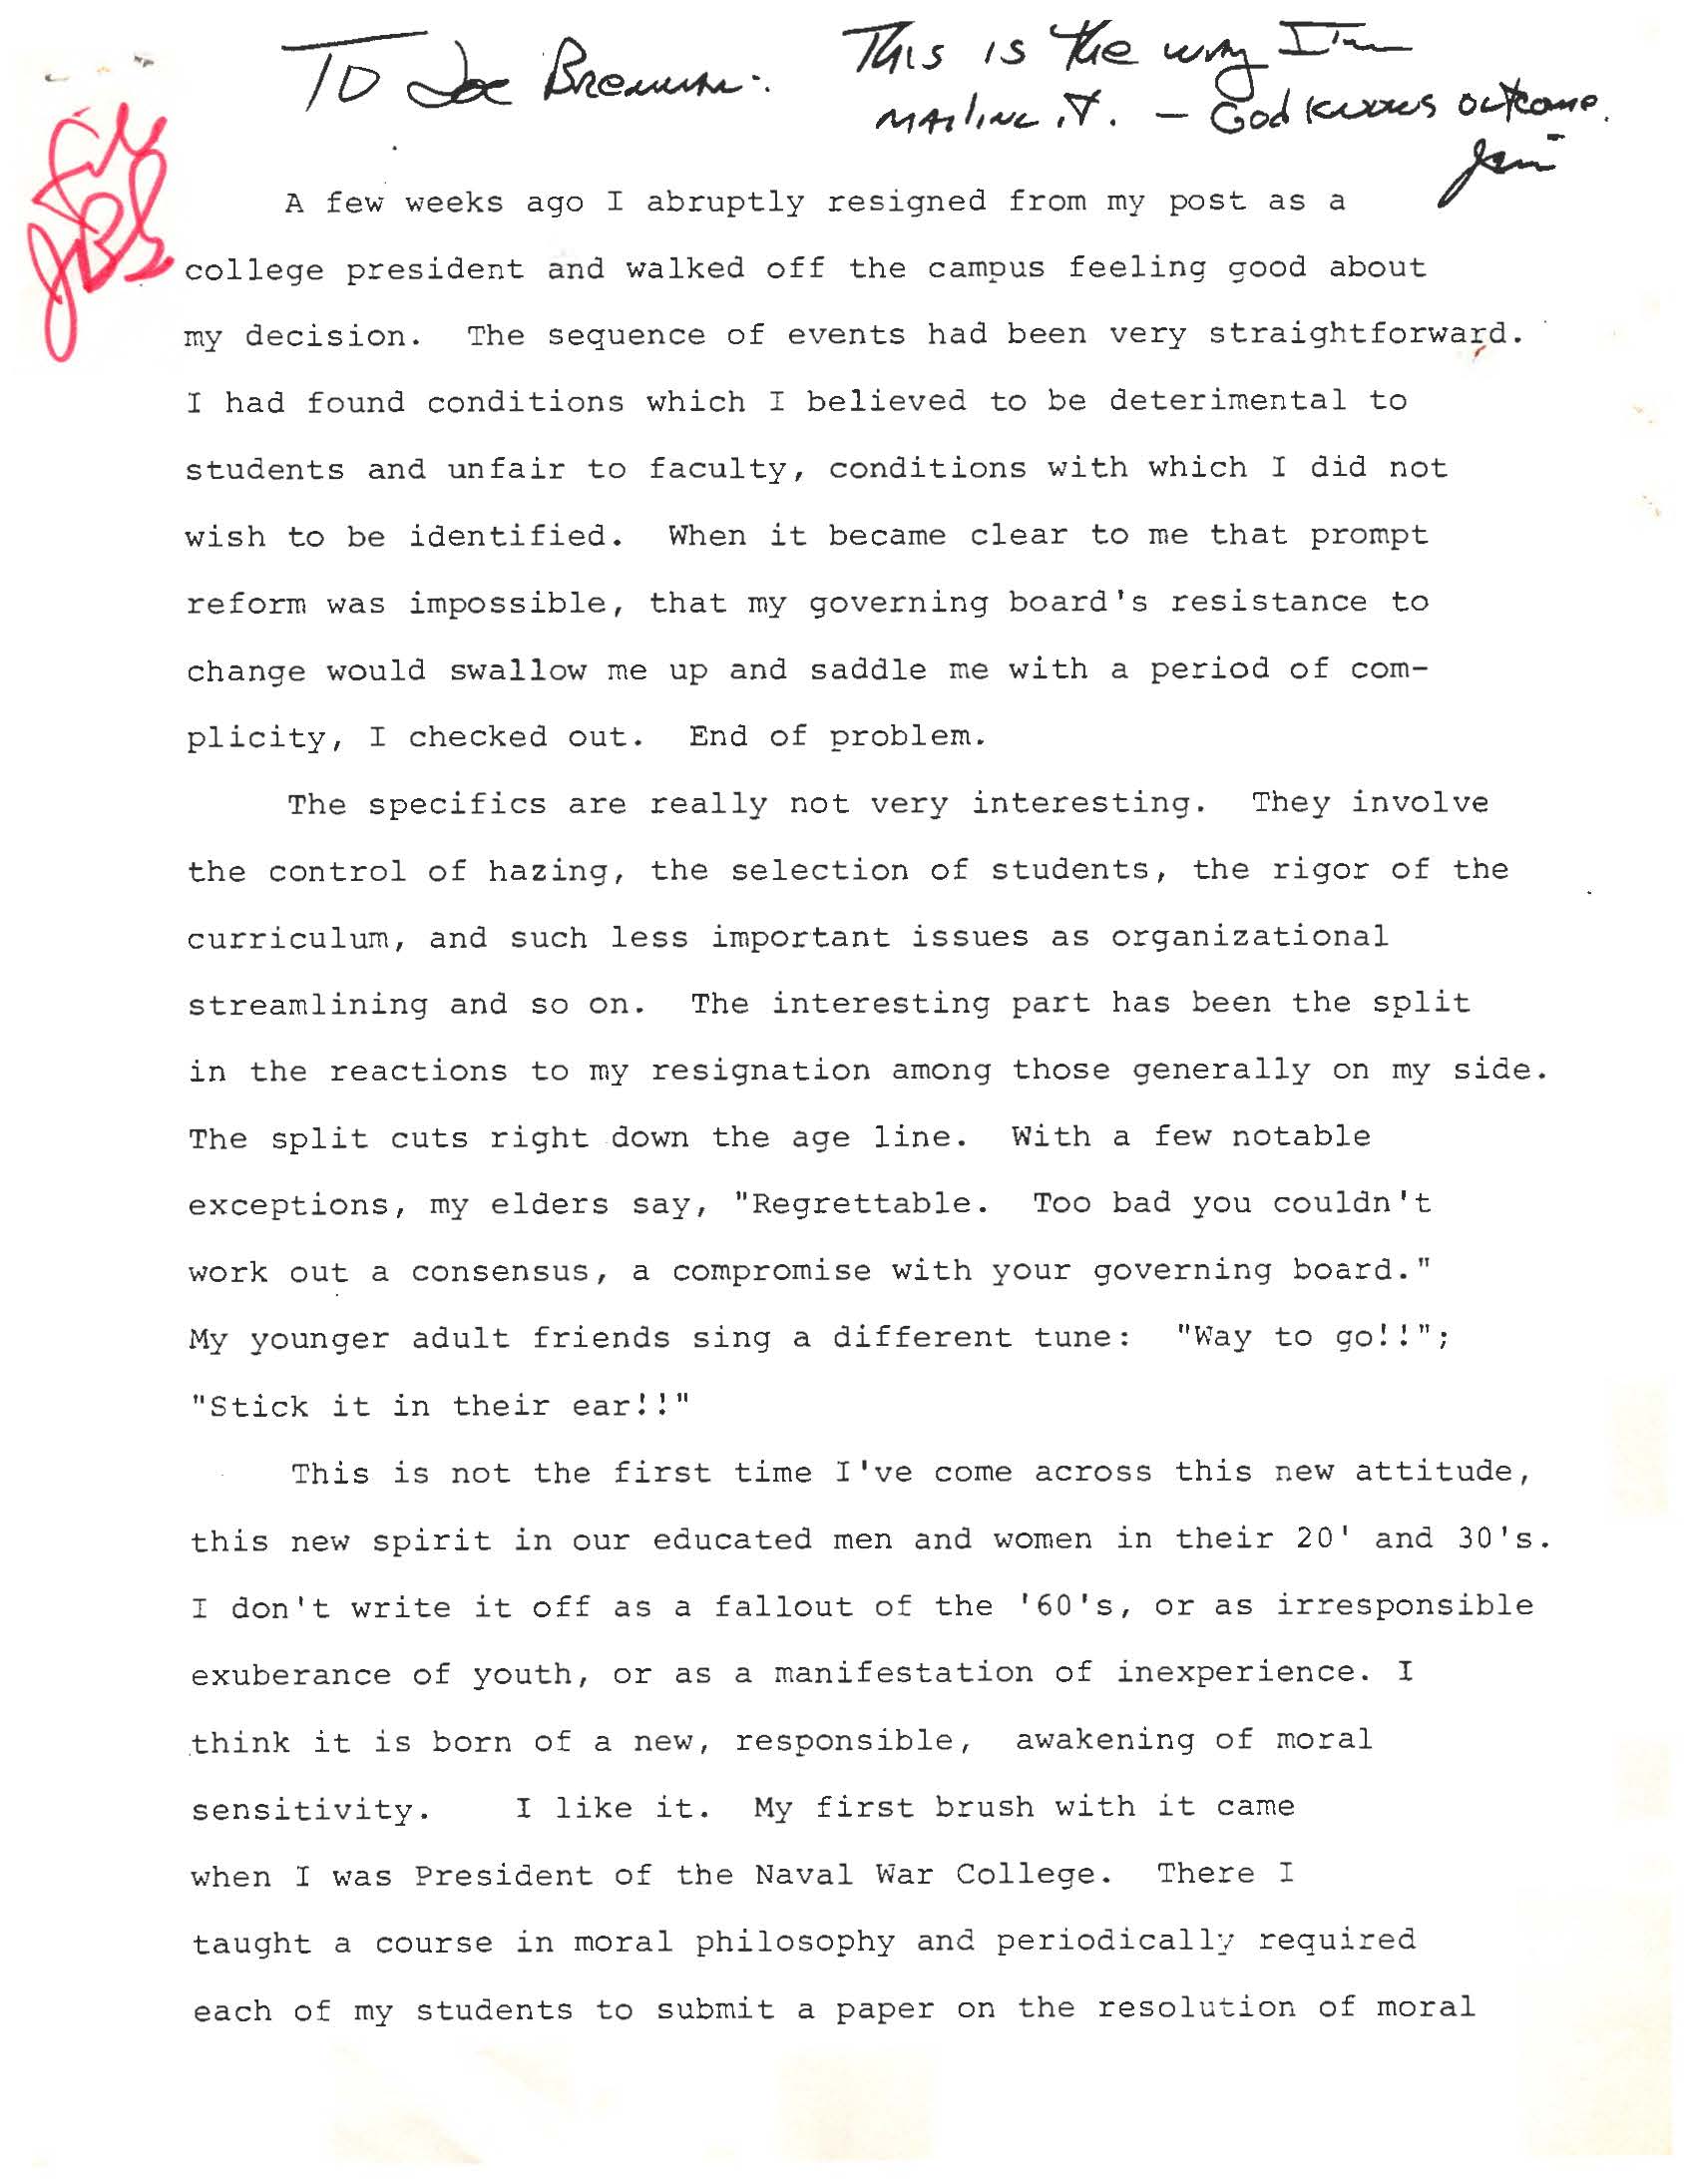 Draft of editorial by James B. Stockdale